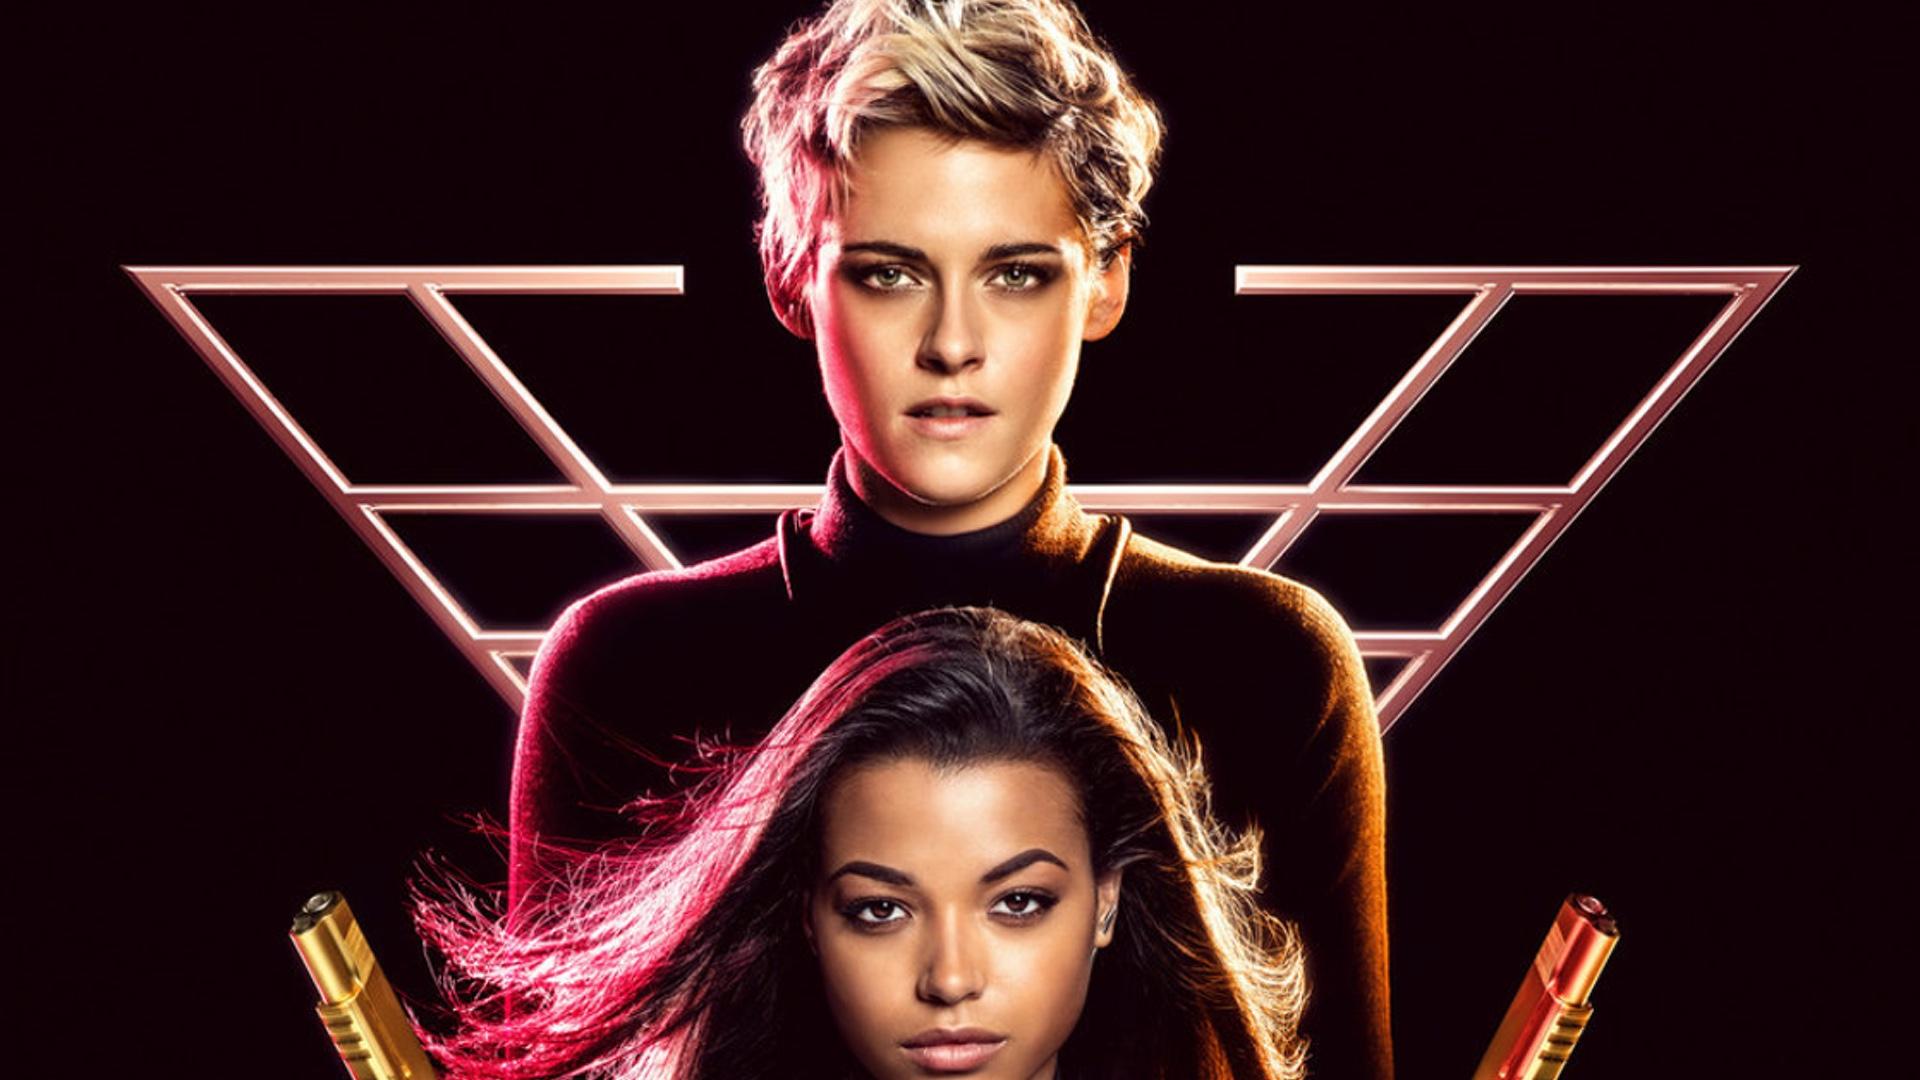 Two New Movie Posters Released For CHARLIE'S ANGELS